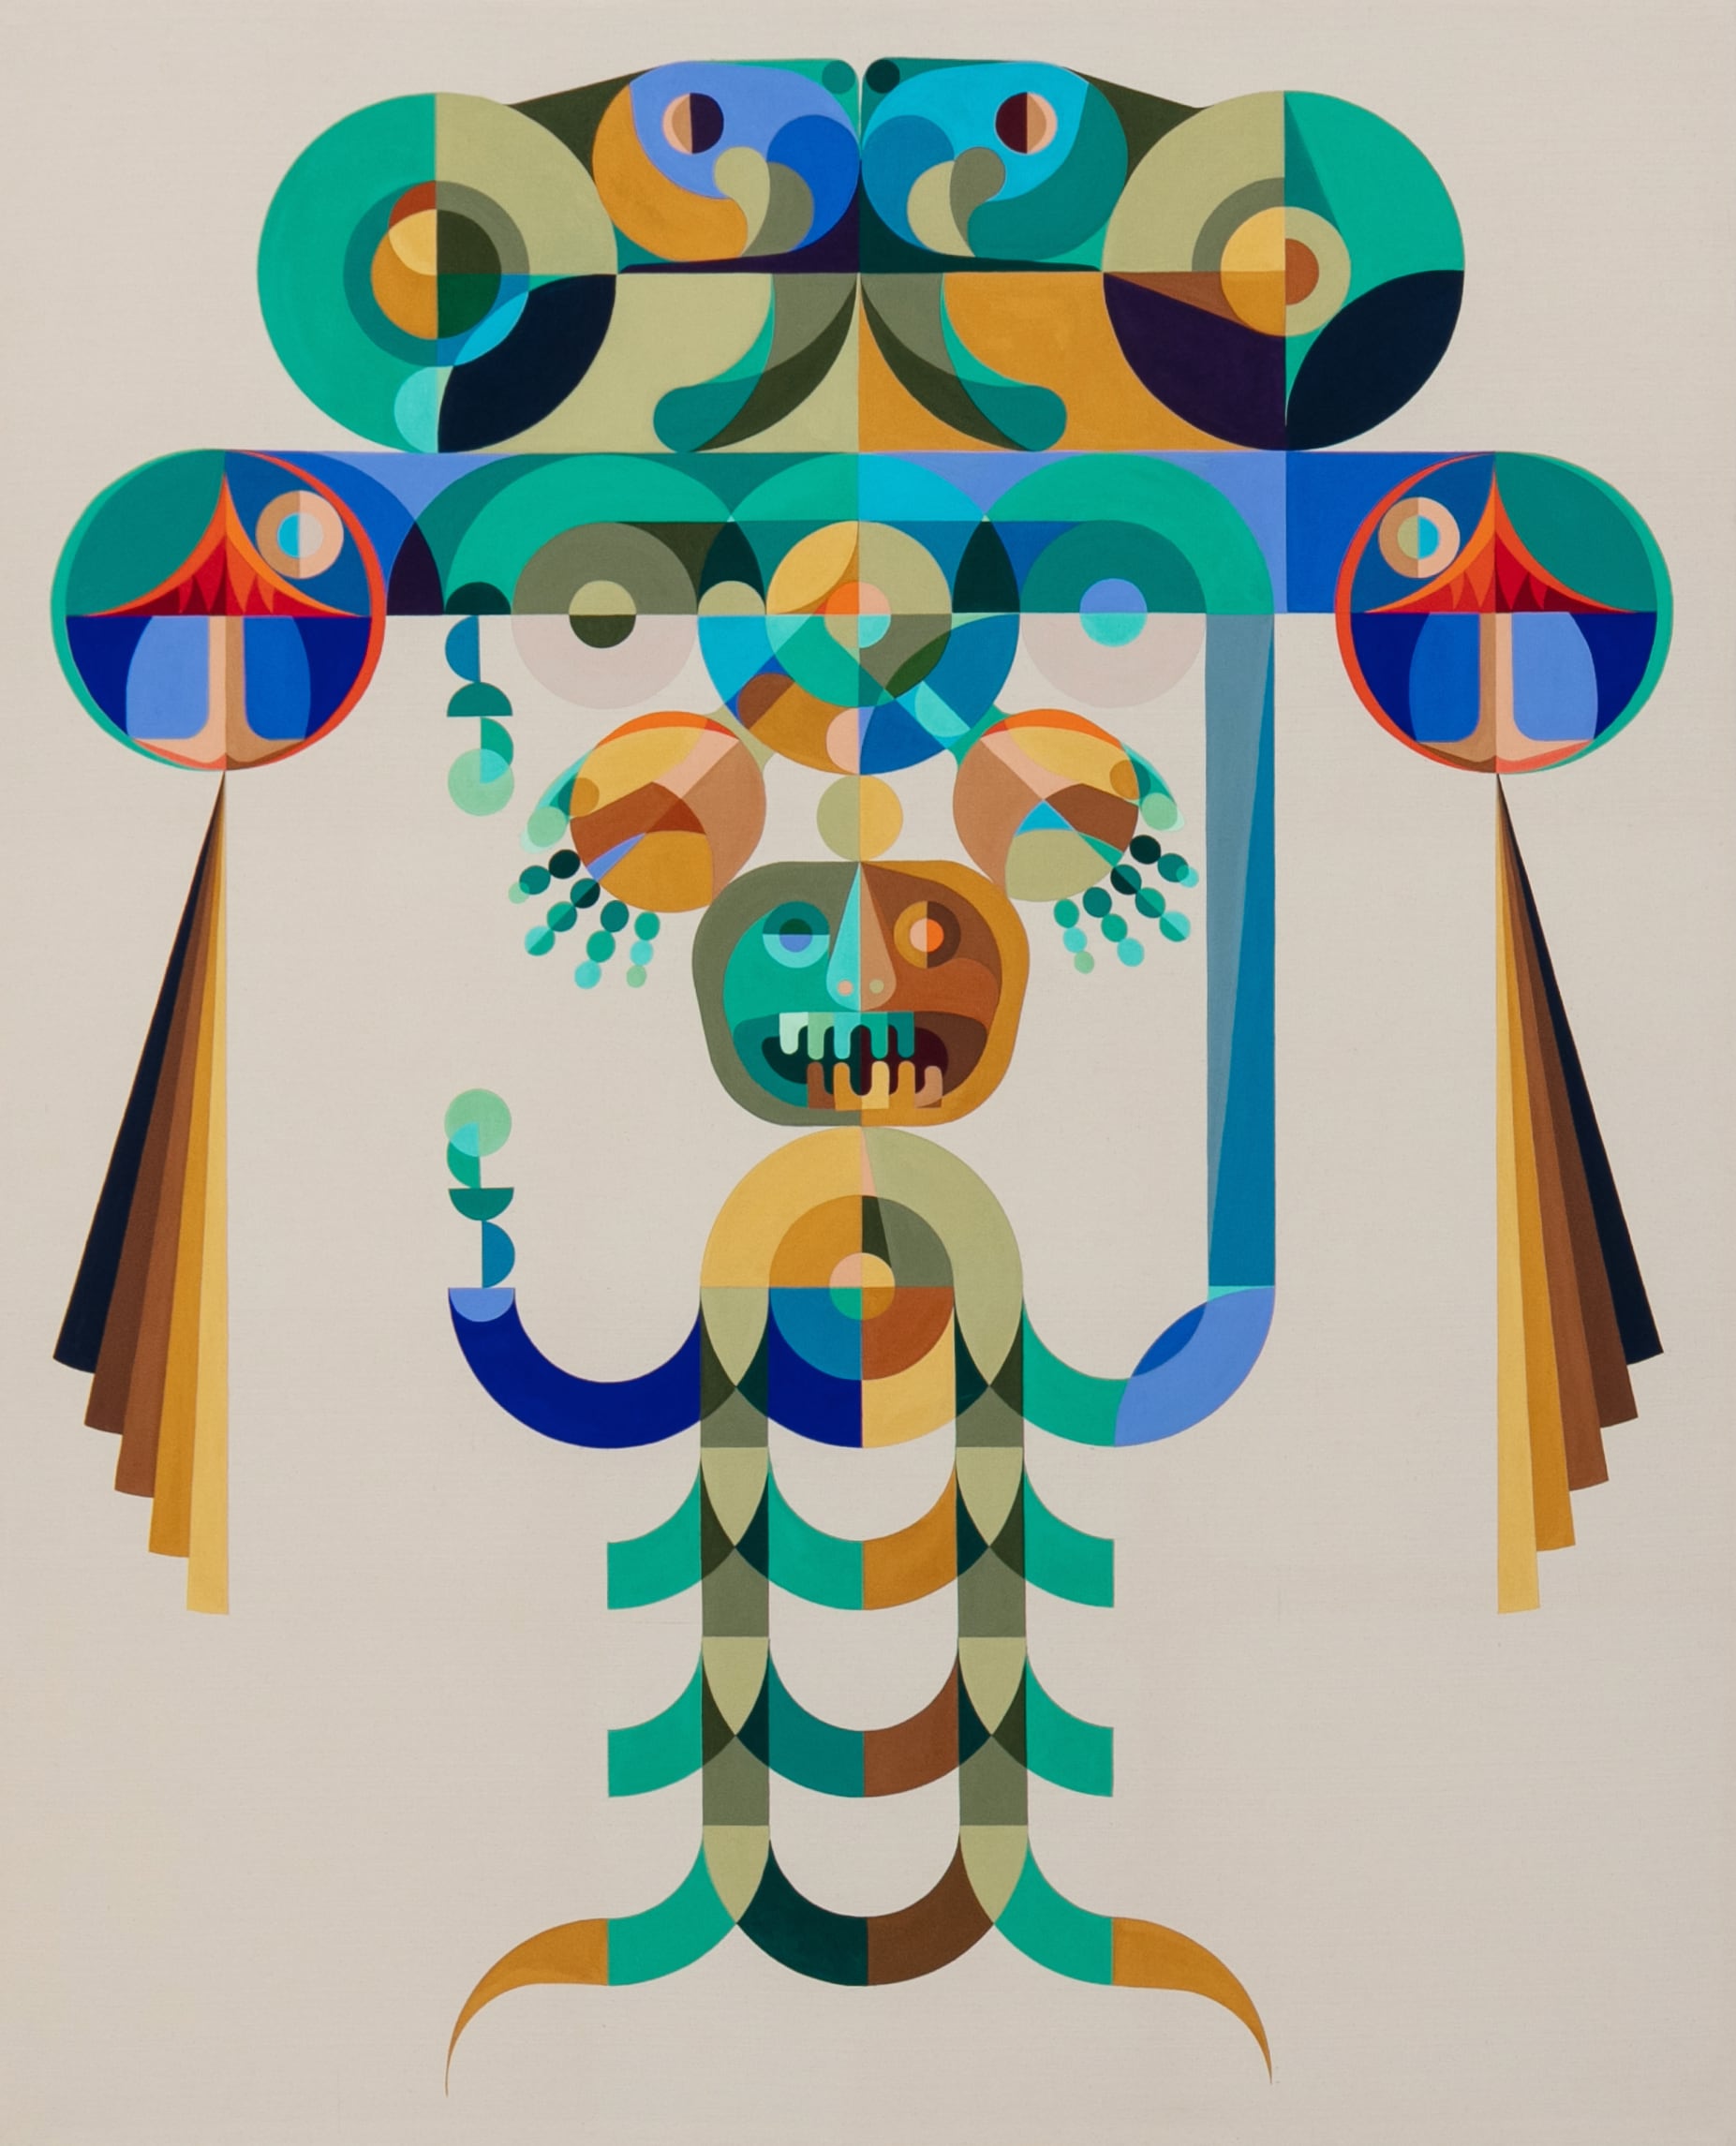 A symmetrical character in a wide headdress stands with bared teeth